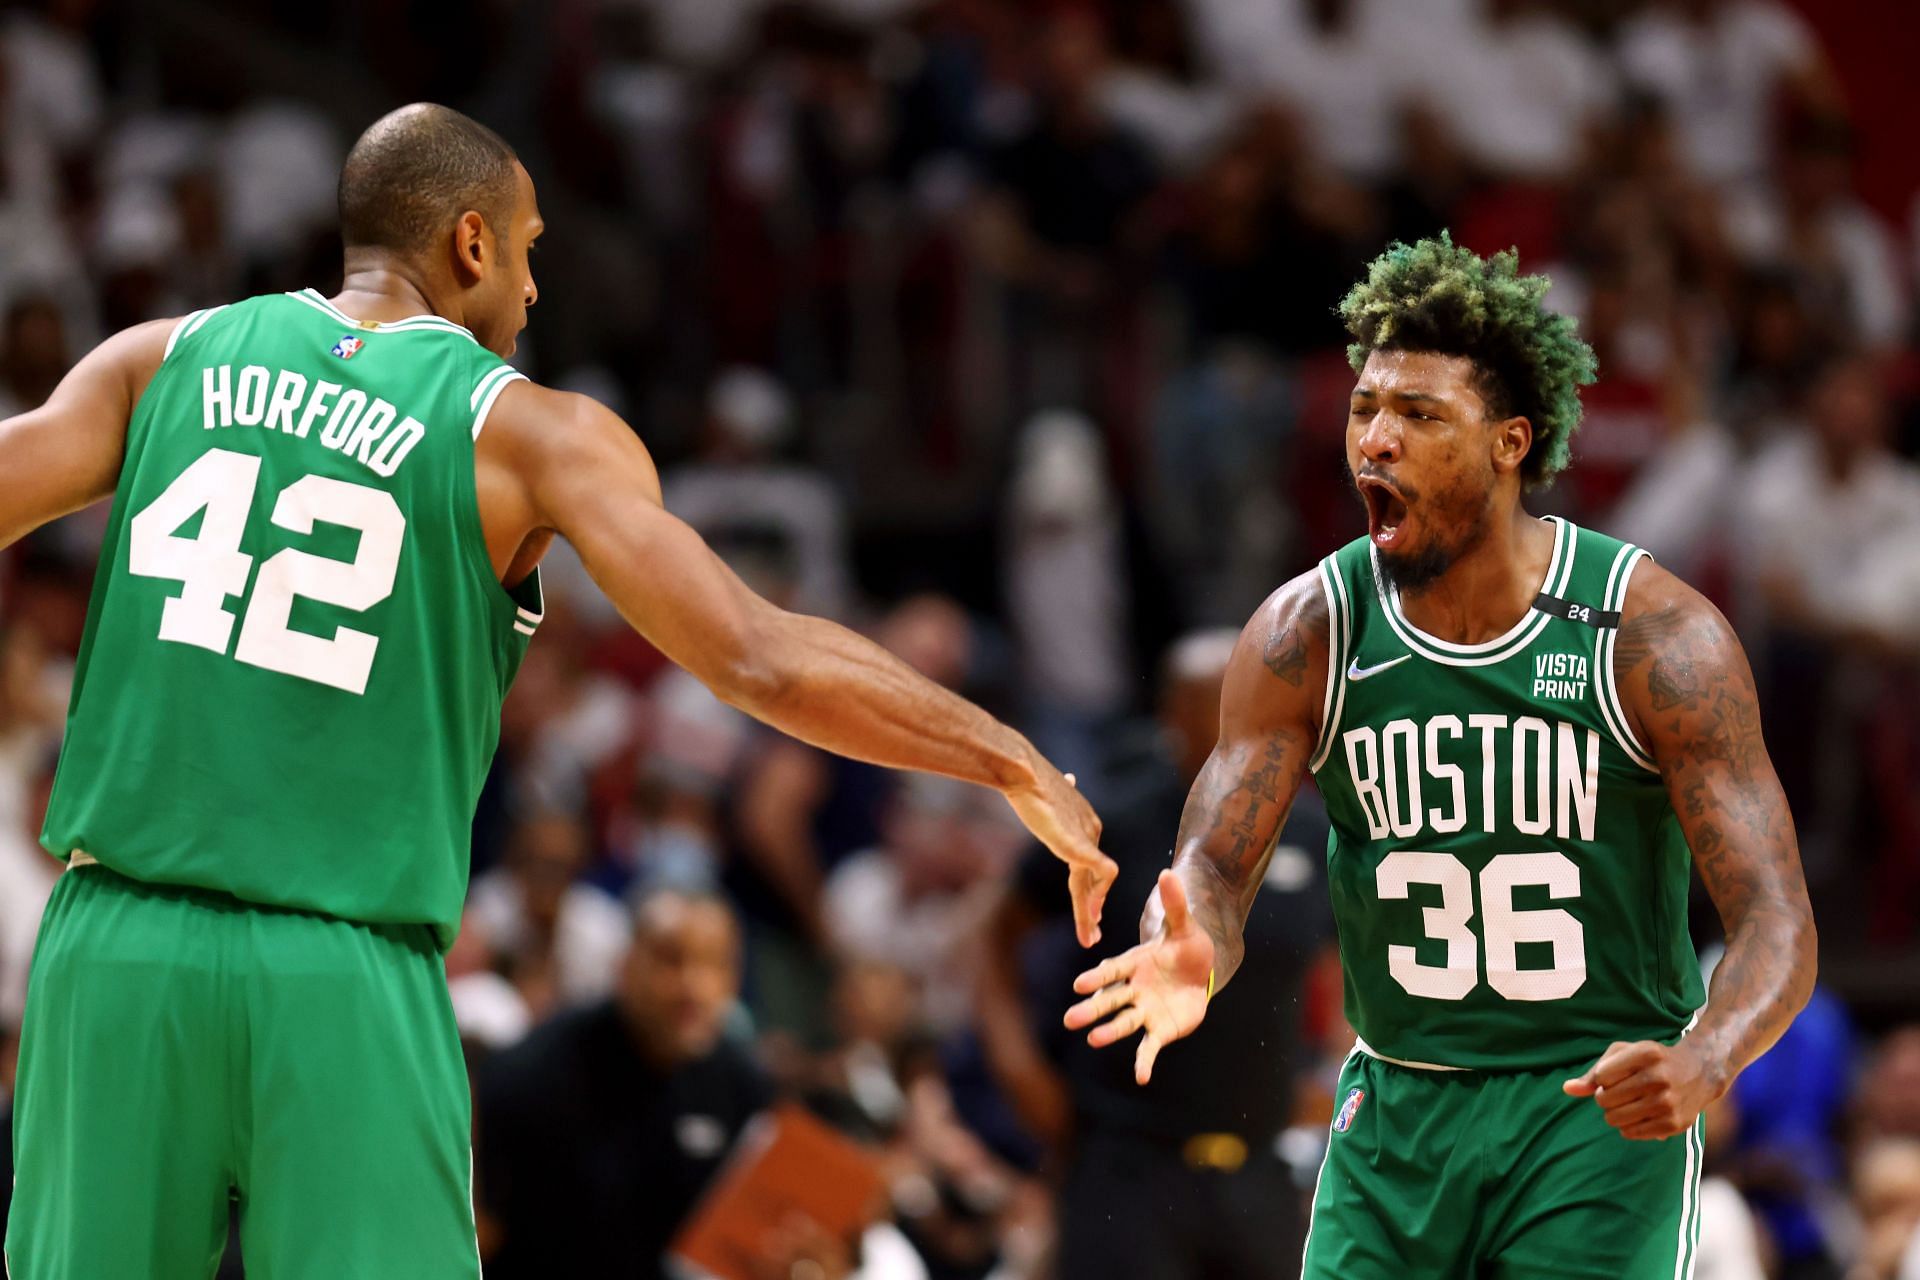 Marcus Smart of the Boston Celtics celebrates a three-point basket with teammate Al Horford.